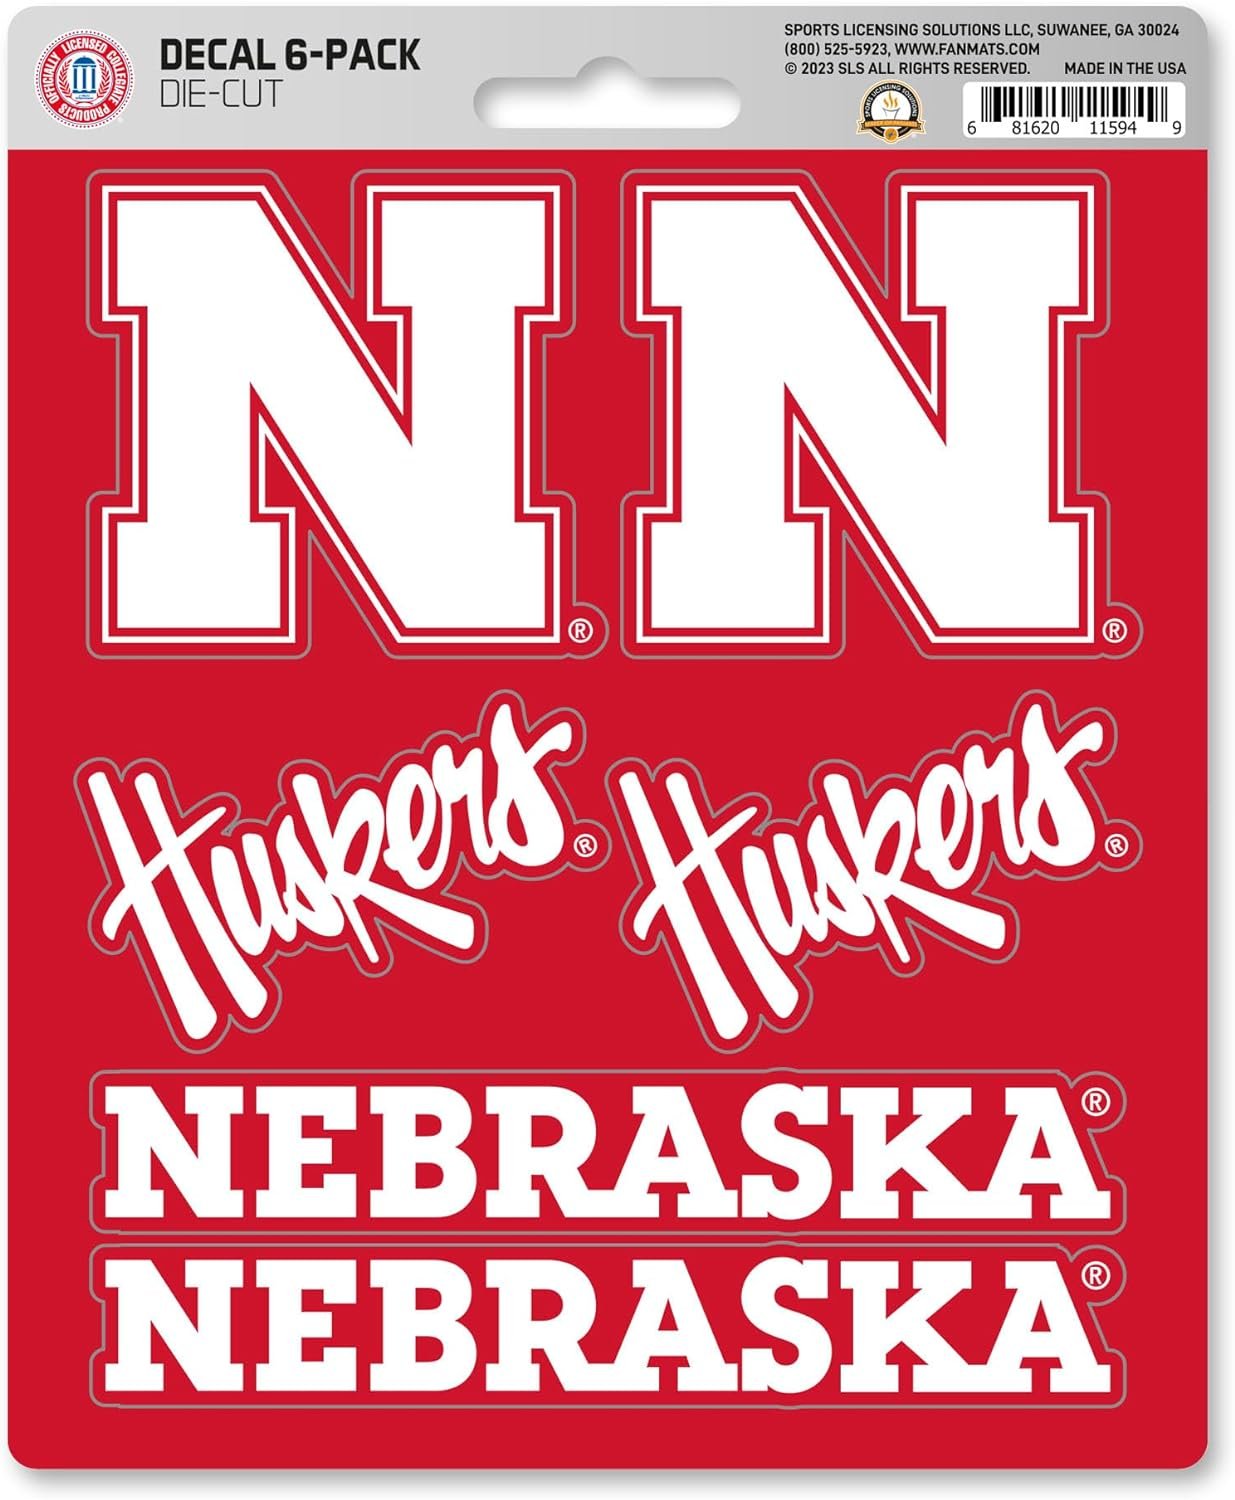 University of Nebraska Cornhuskers 6-Piece Decal Sticker Set, 5x6 Inch Sheet, Gift for football fans for any hard surfaces around home, automotive, personal items